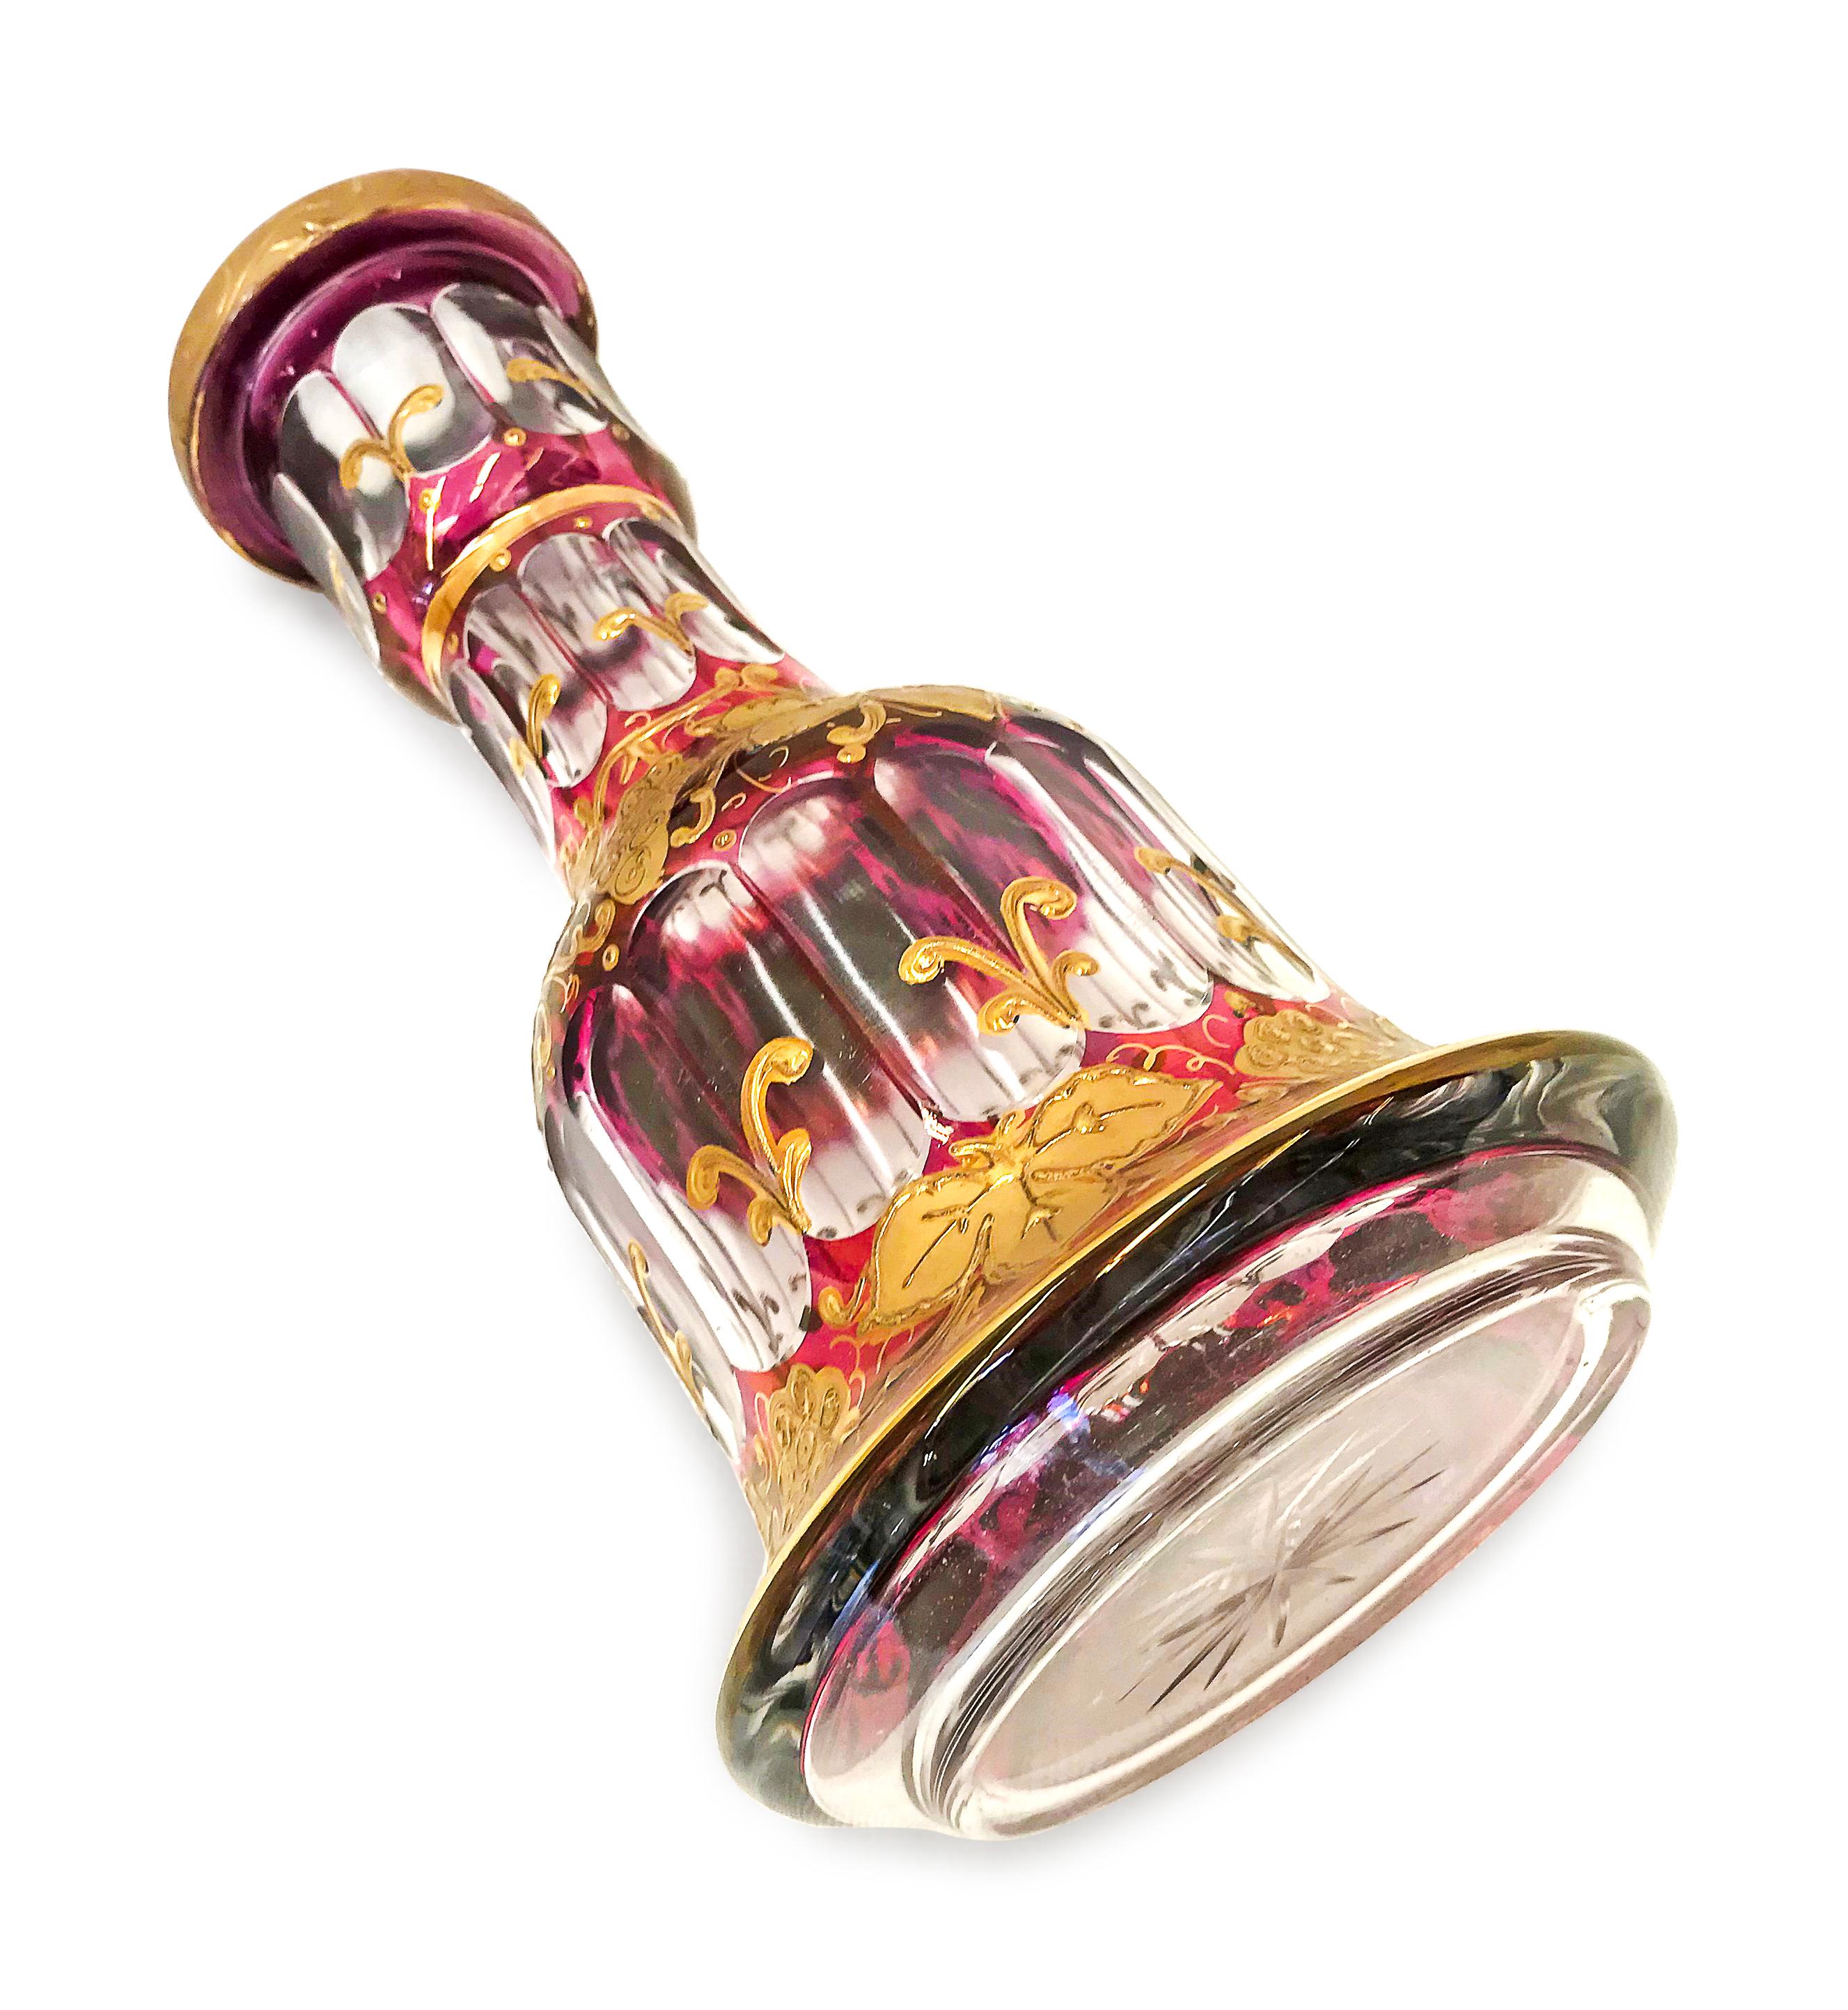 Beautiful glass hookah with 18 karat gold plated design . it has burgundy color mixed with gold which makes it absolutely beautiful .The glass has hand cut design itself which is unique and pretty.
W : 6